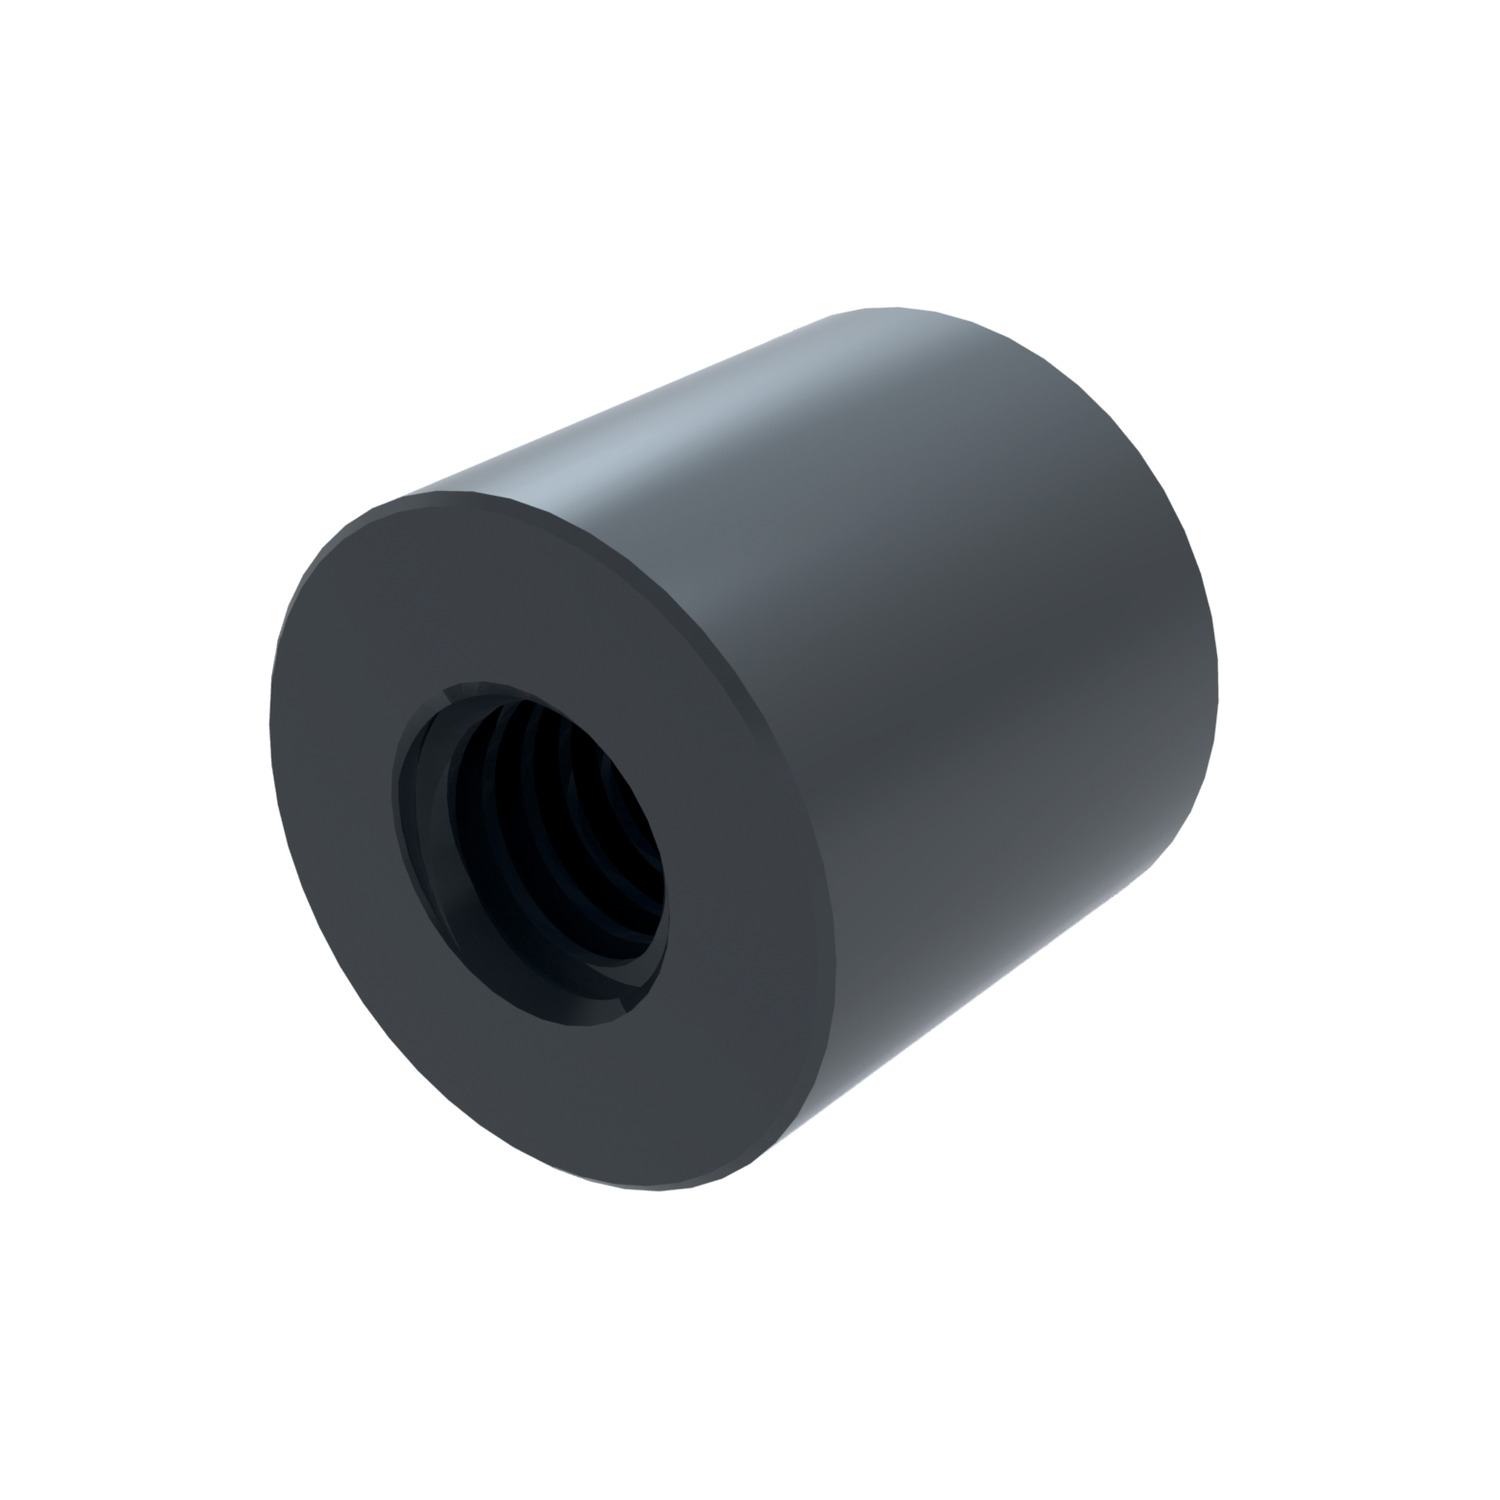 Cylindrical Nylon Nuts Can be used without lubrication for manual or powered control and medium/high speeds under moderate loads. Low noise.